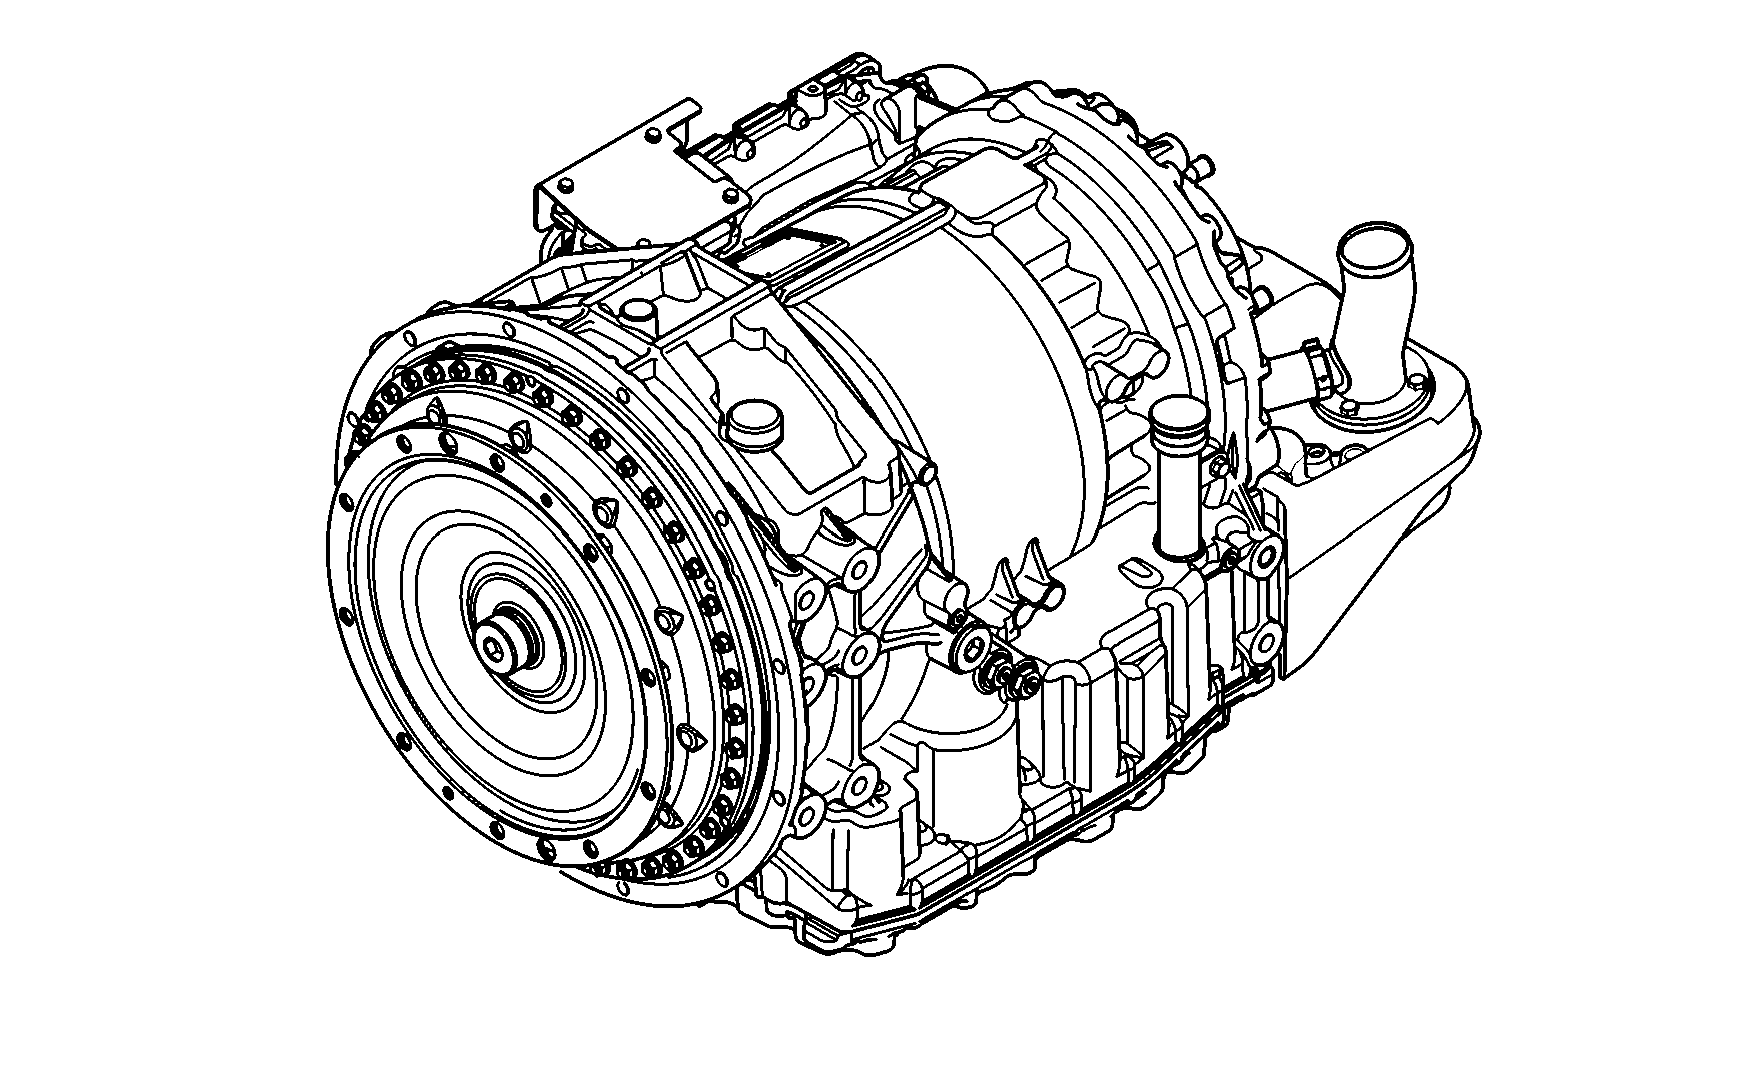 drawing for SCANIA 2260654 - 6 AP 1700 B (figure 1)